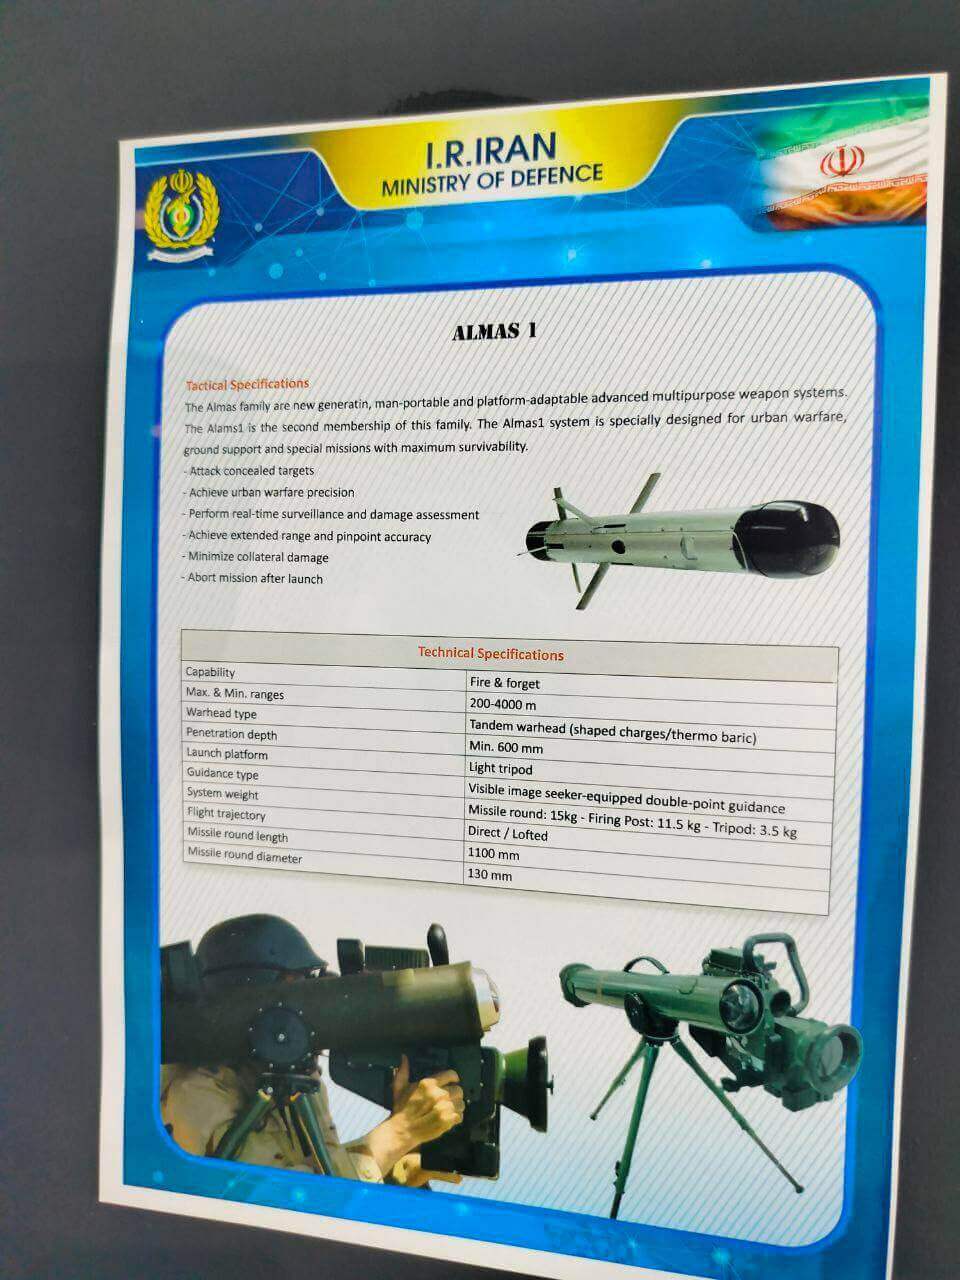 Technical characteristics of the Almas1 anti-tank missile system